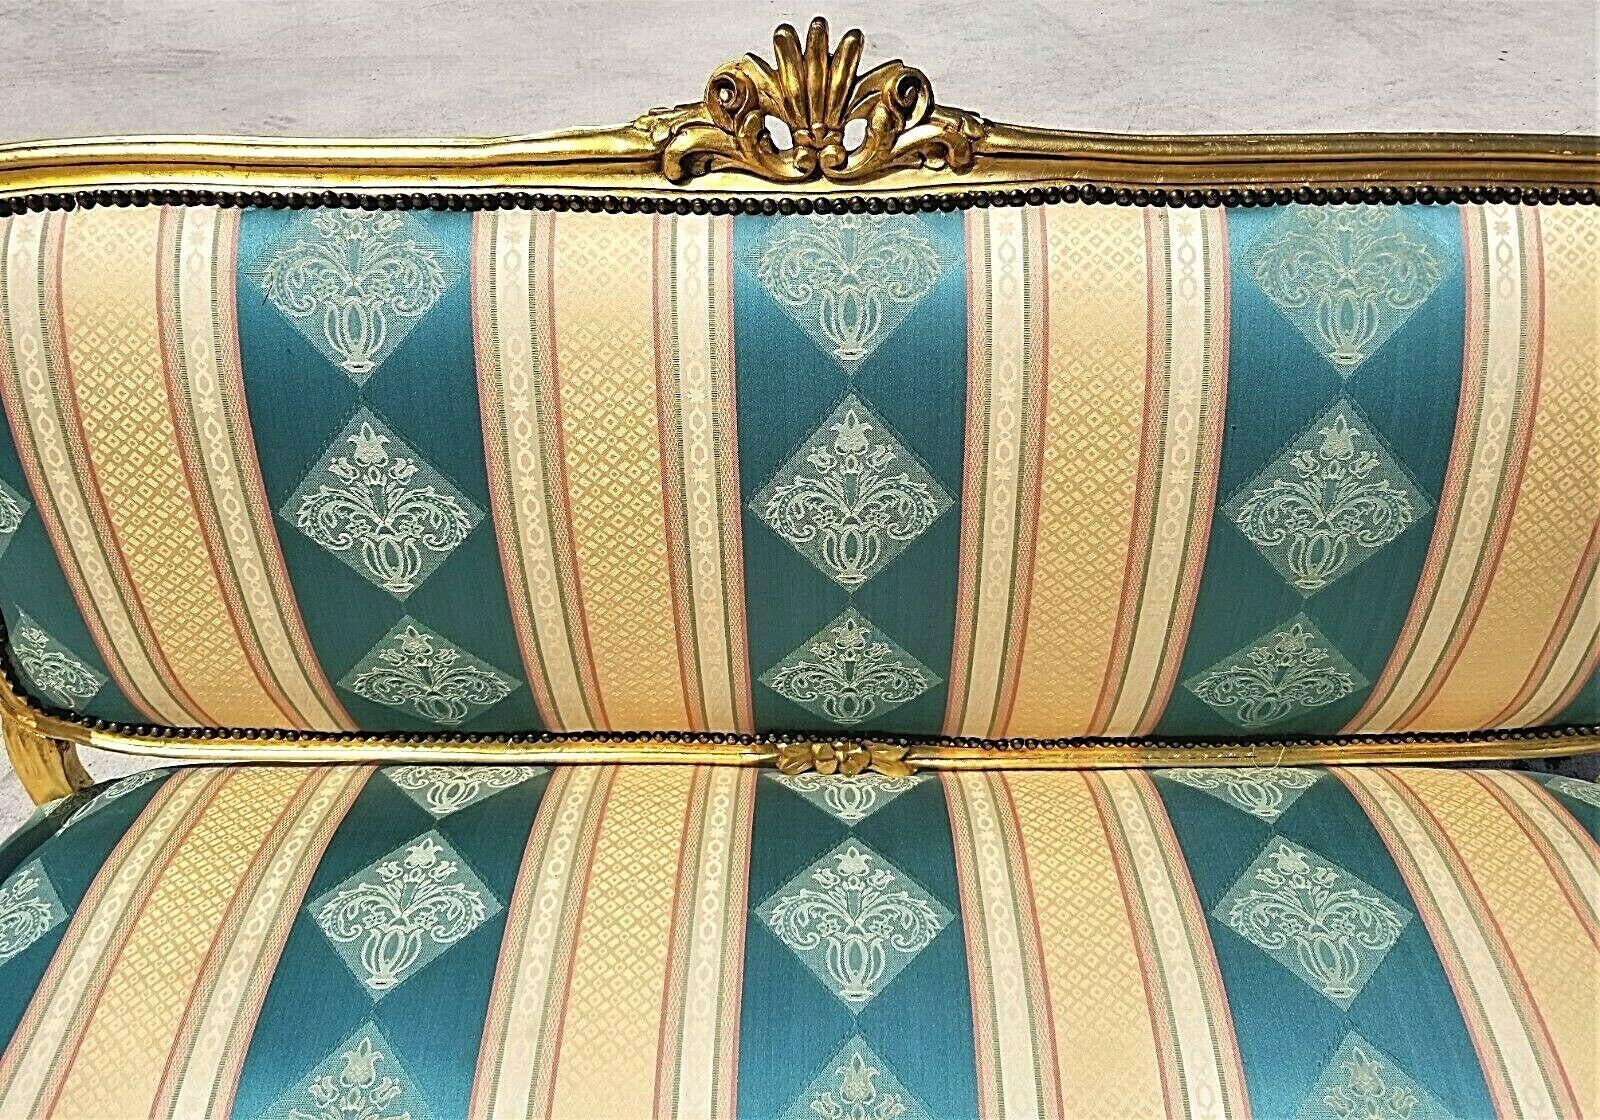 For FULL item description be sure to click on CONTINUE READING at the bottom of this listing.

Offering one of our recent palm beach estate fine furniture acquisitions of a
lovely vintage French Louis XV style gold leaf gilt open arm